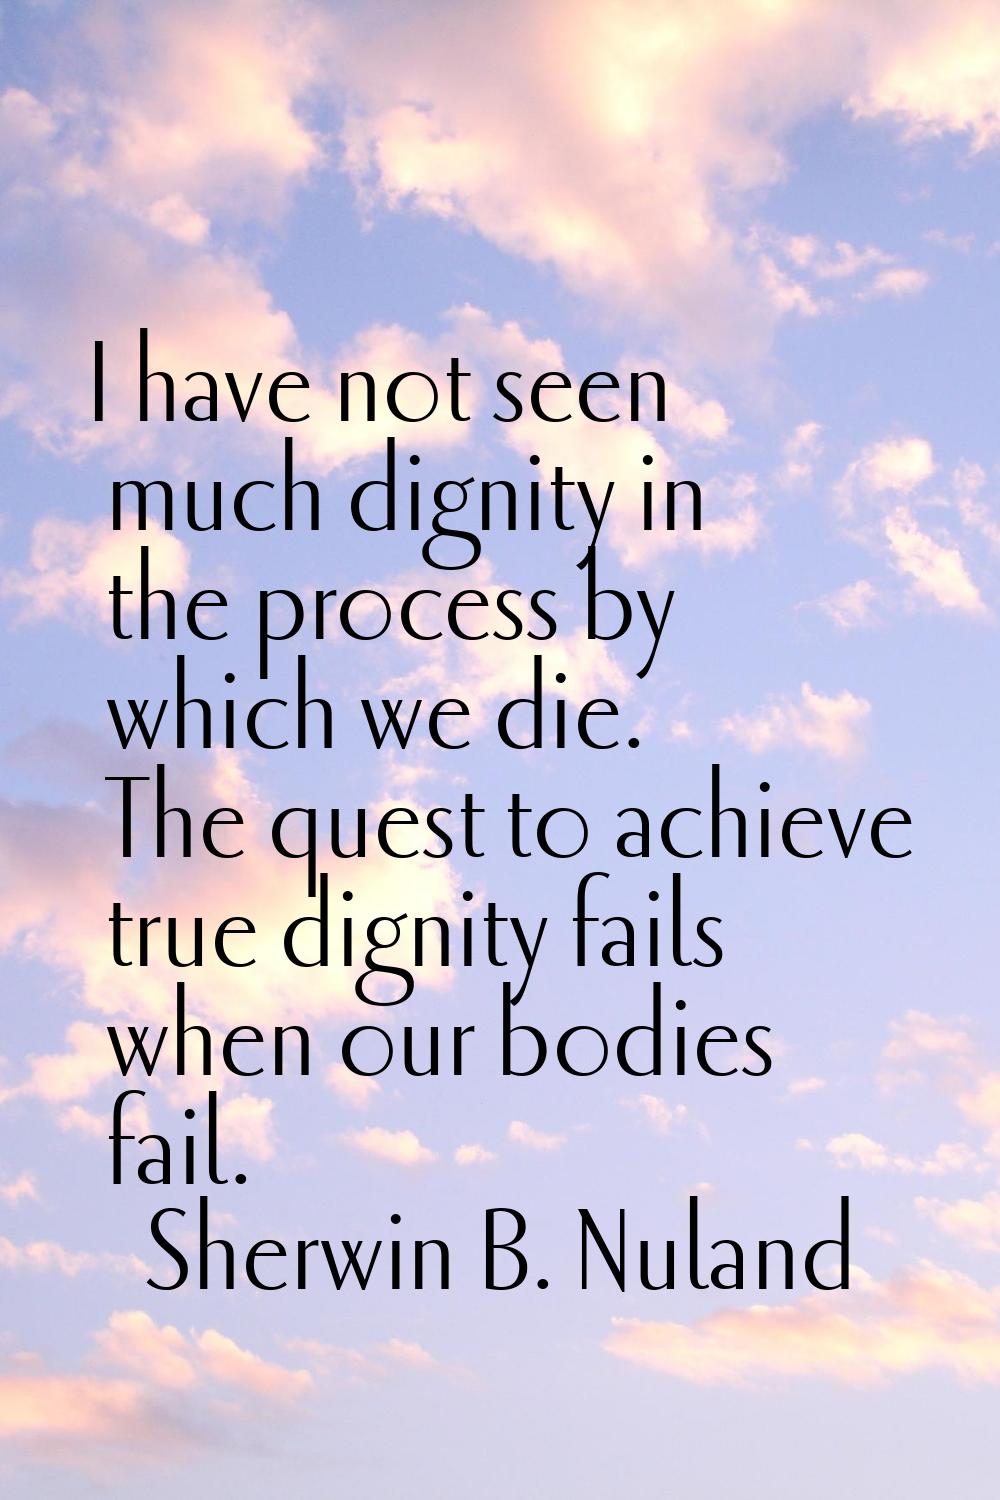 I have not seen much dignity in the process by which we die. The quest to achieve true dignity fail